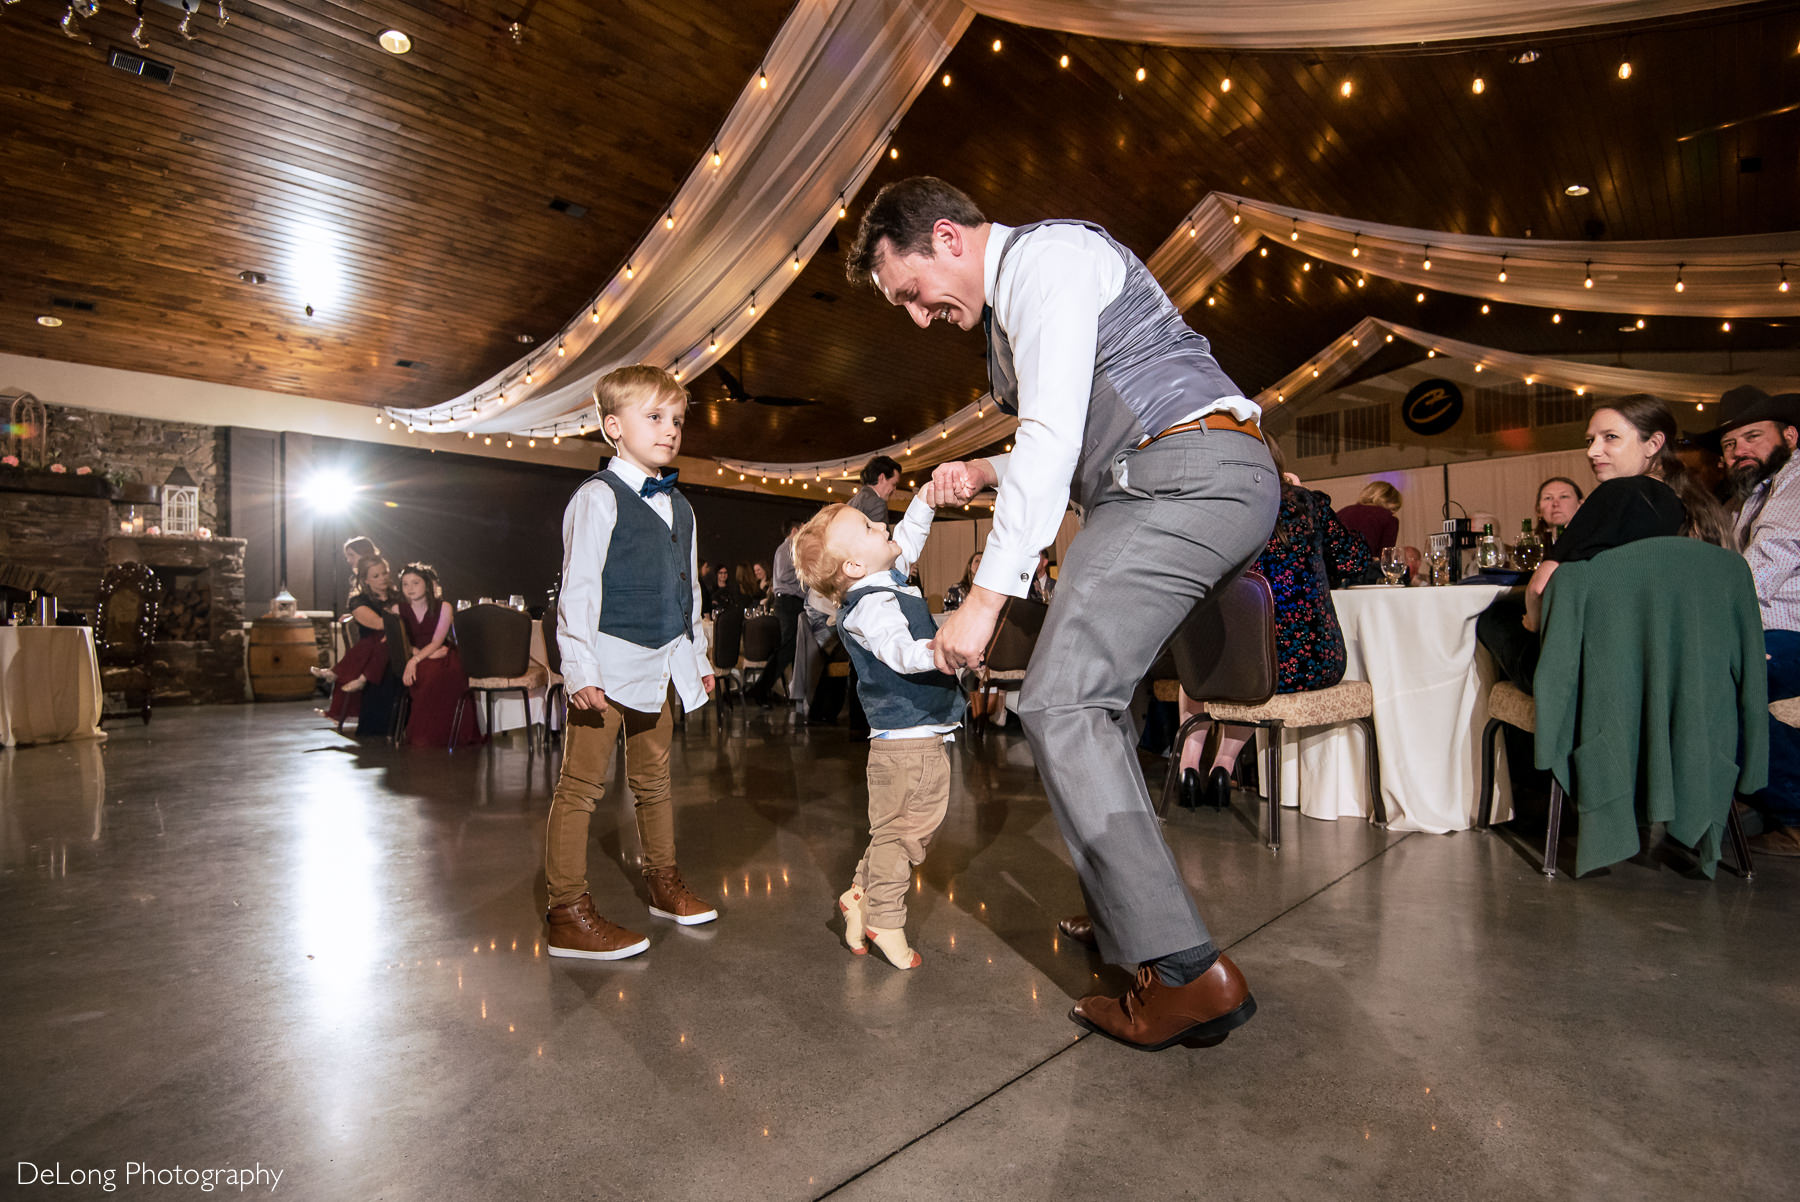 Man dancing with little boy during reception at Childress Vineyards by Charlotte Wedding Photographers DeLong Photography